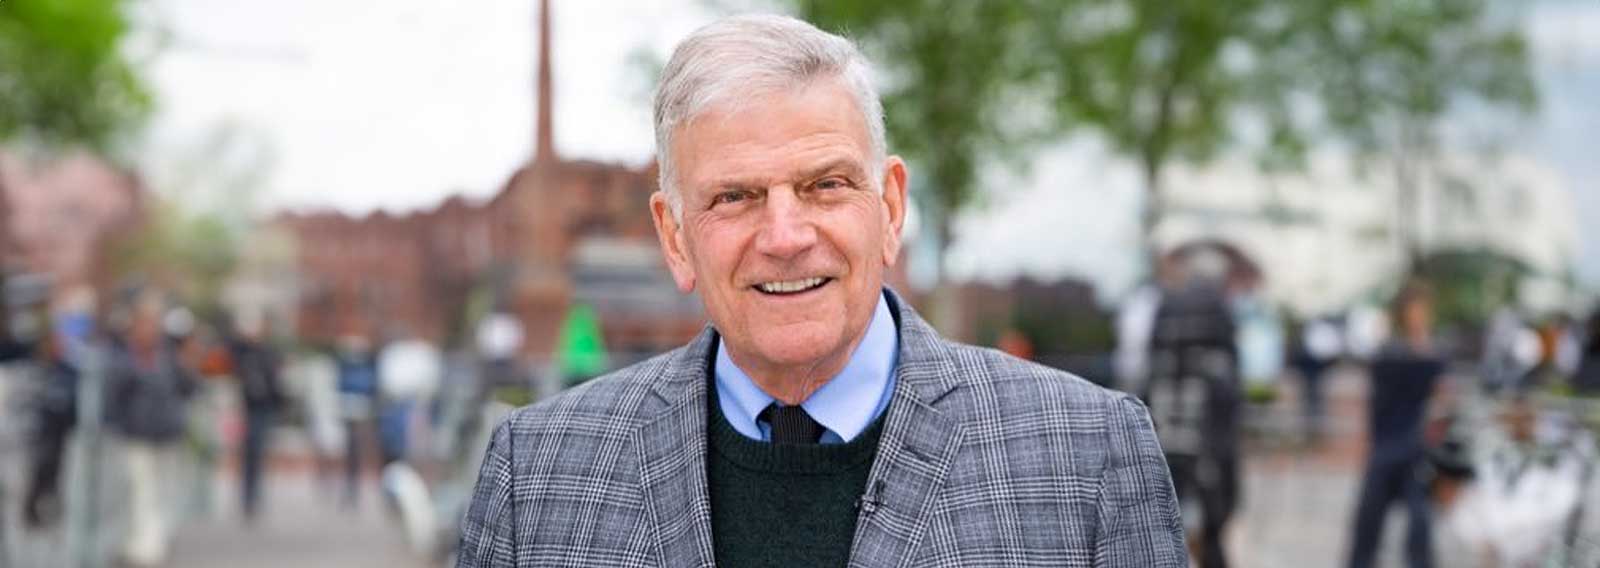 Franklin Graham Laments Church of England’s LGBT Capitulation